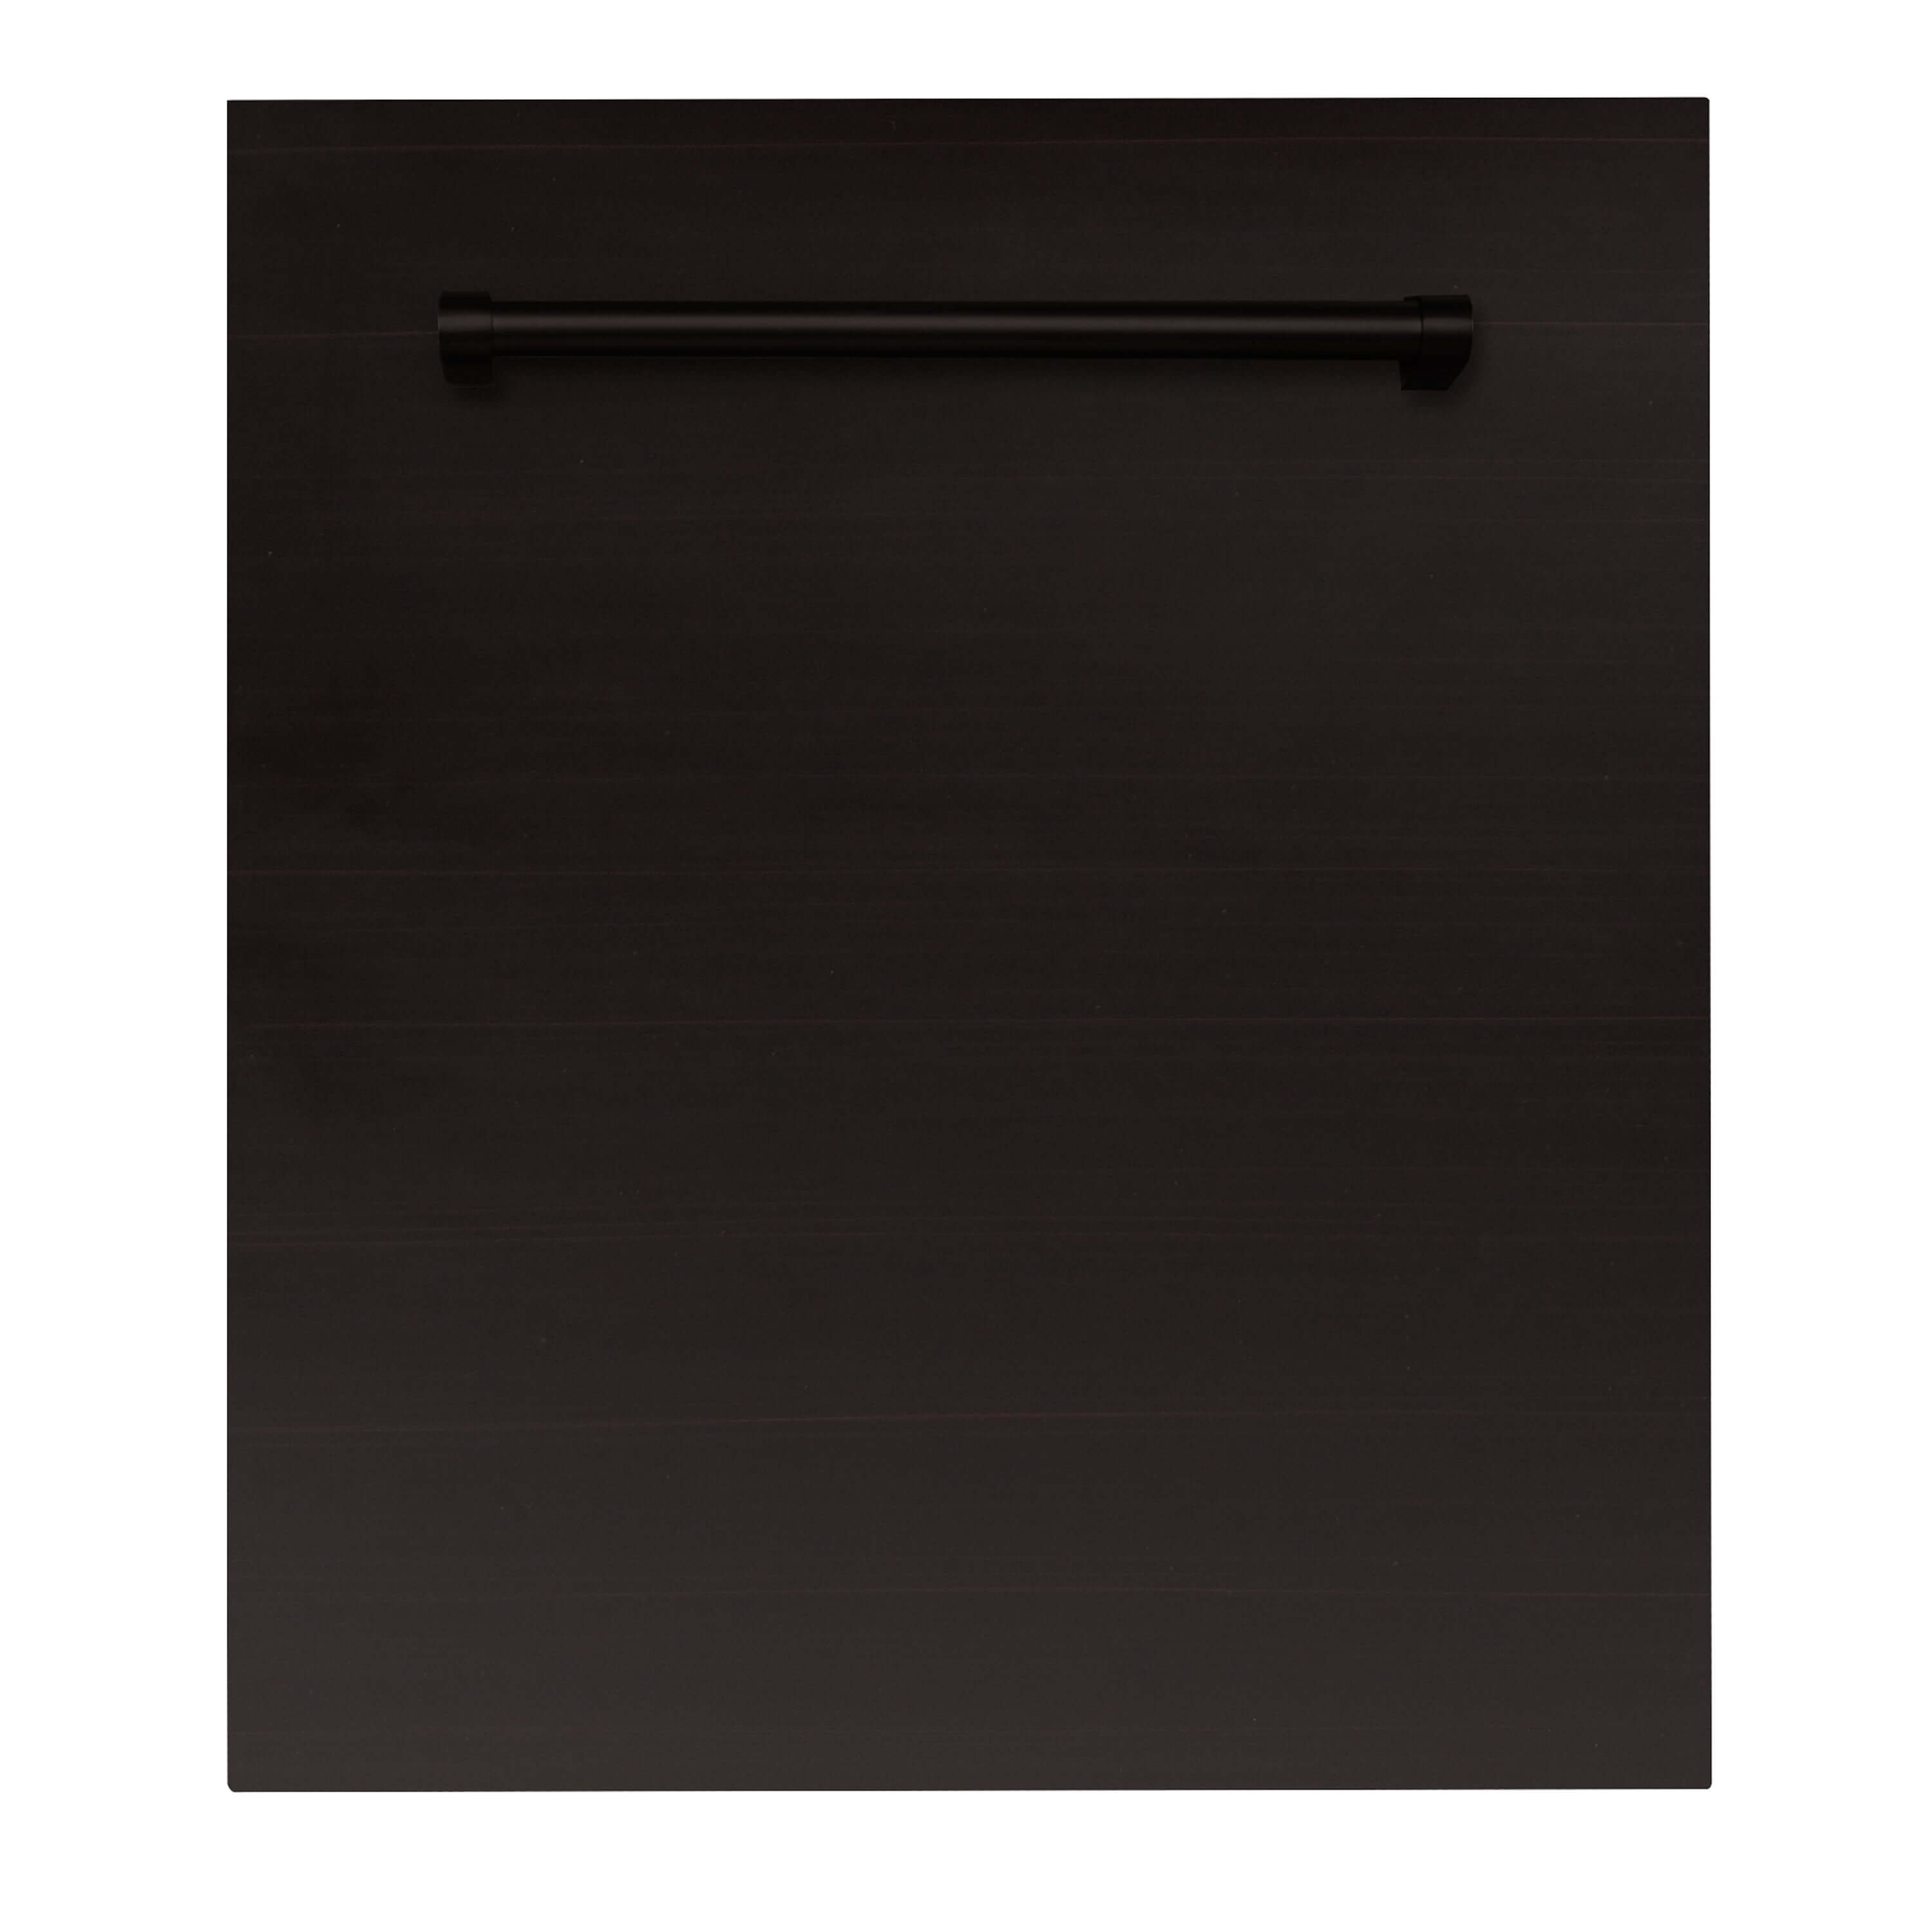 ZLINE 24 in. Oil-Rubbed Bronze Top Control Built-In Dishwasher with Stainless Steel Tub and Traditional Style Handle, 52dBa (DW-ORB-H-24)